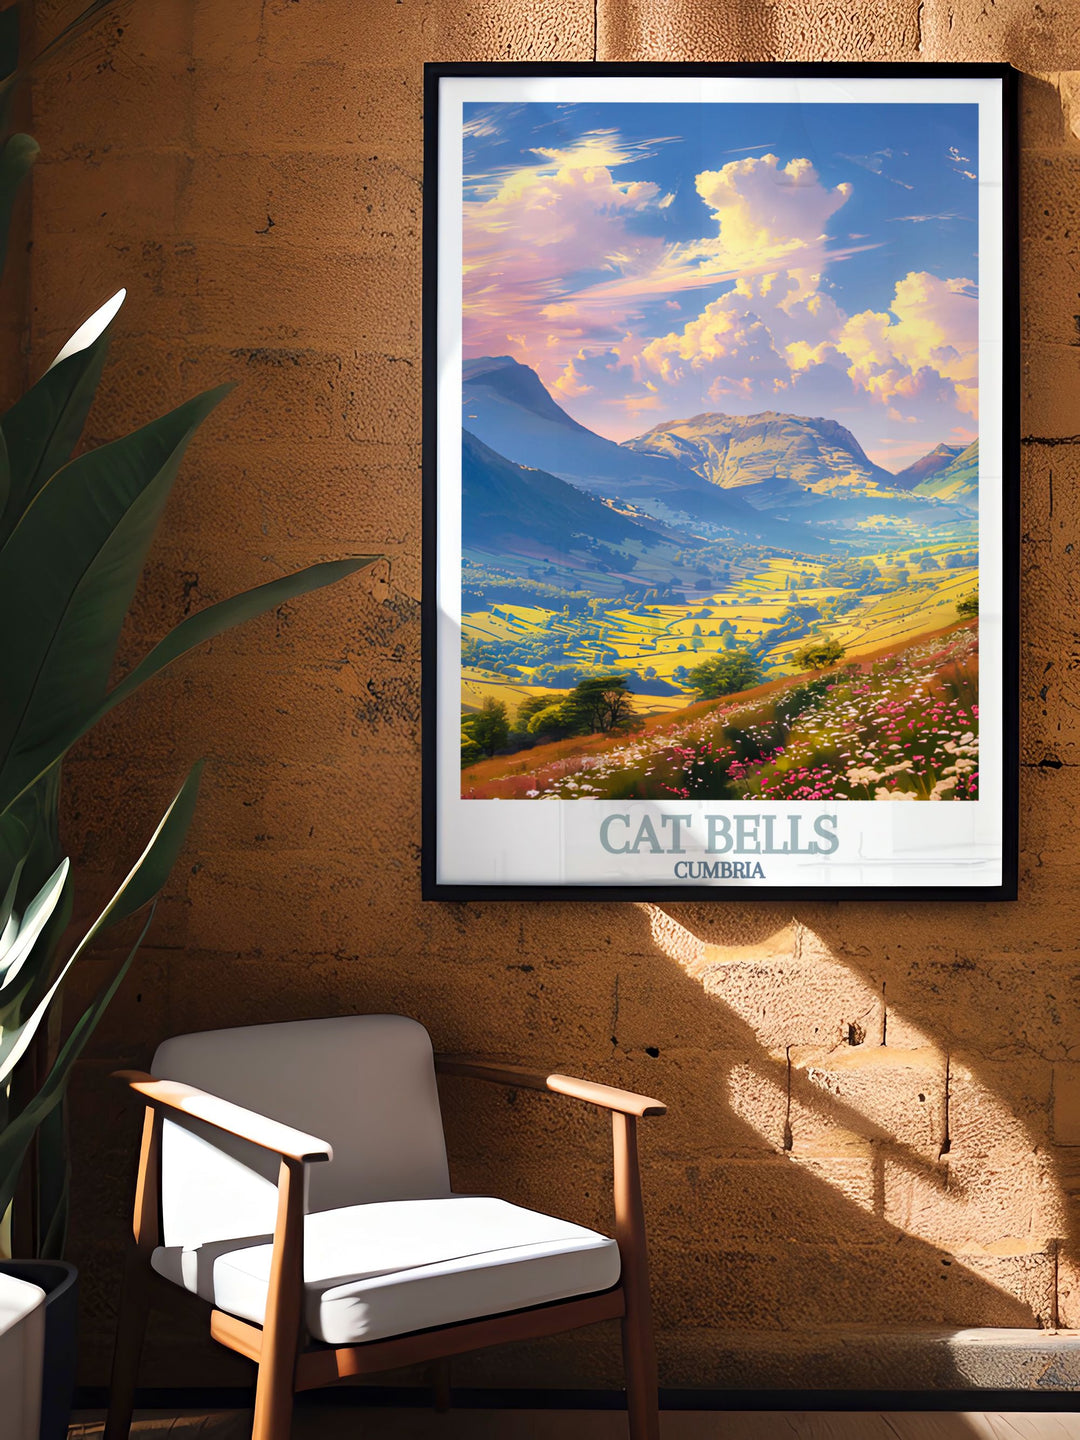 Experience the charm of Newlands Valley with our Cumbria illustration this travel poster is perfect for wall decor and home living decor bringing the serene beauty of the Lake District into your space ideal for nature lovers and hikers.